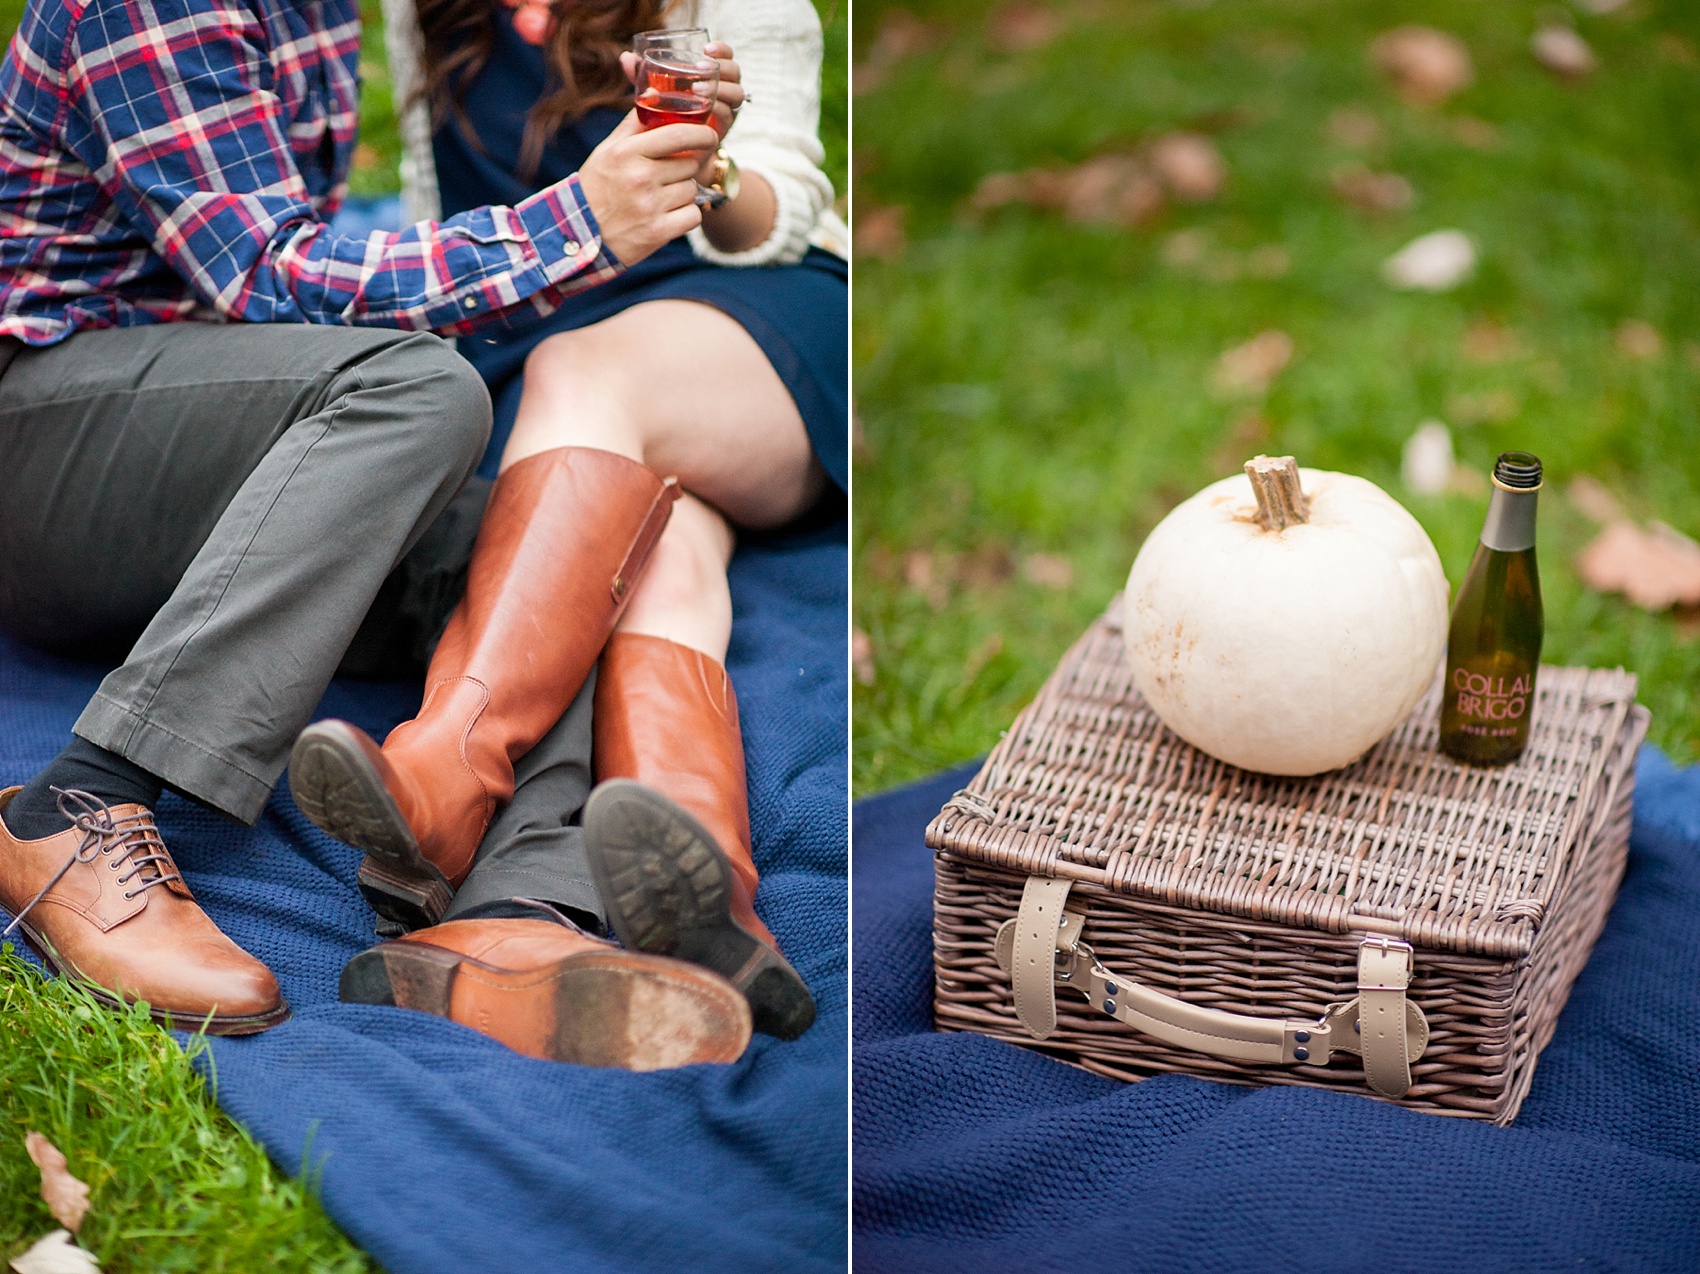 Central Park engagement photos in the fall with a picnic. New York City wedding photographer, Mikkel Paige Photography.